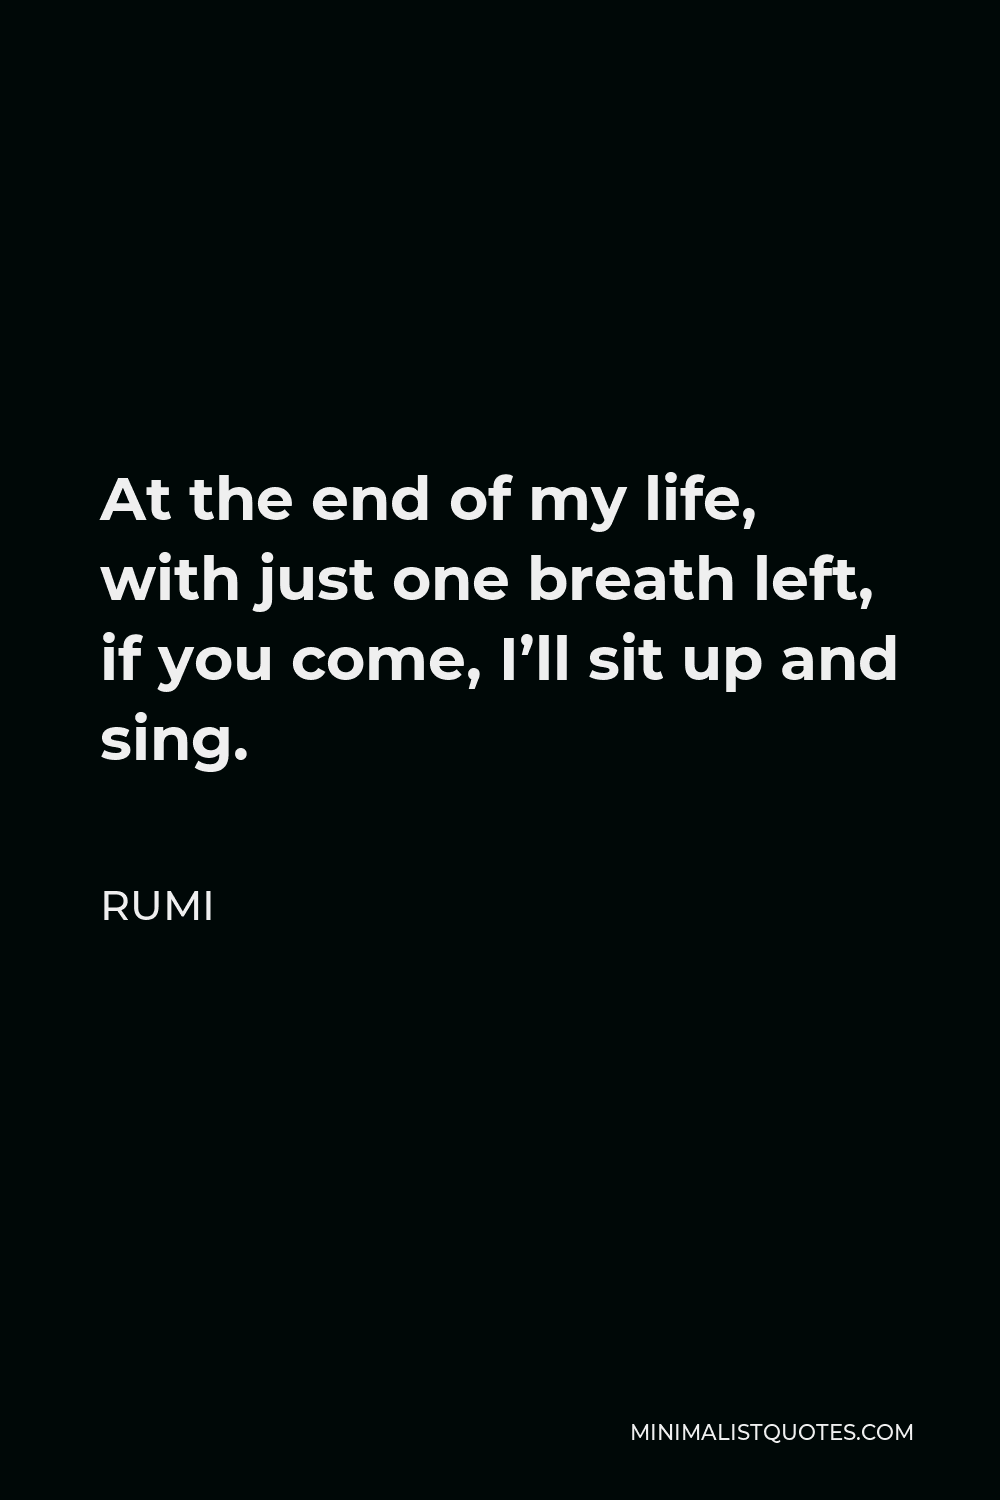 Rumi Quote - At the end of my life, with just one breath left, if you come, I’ll sit up and sing.